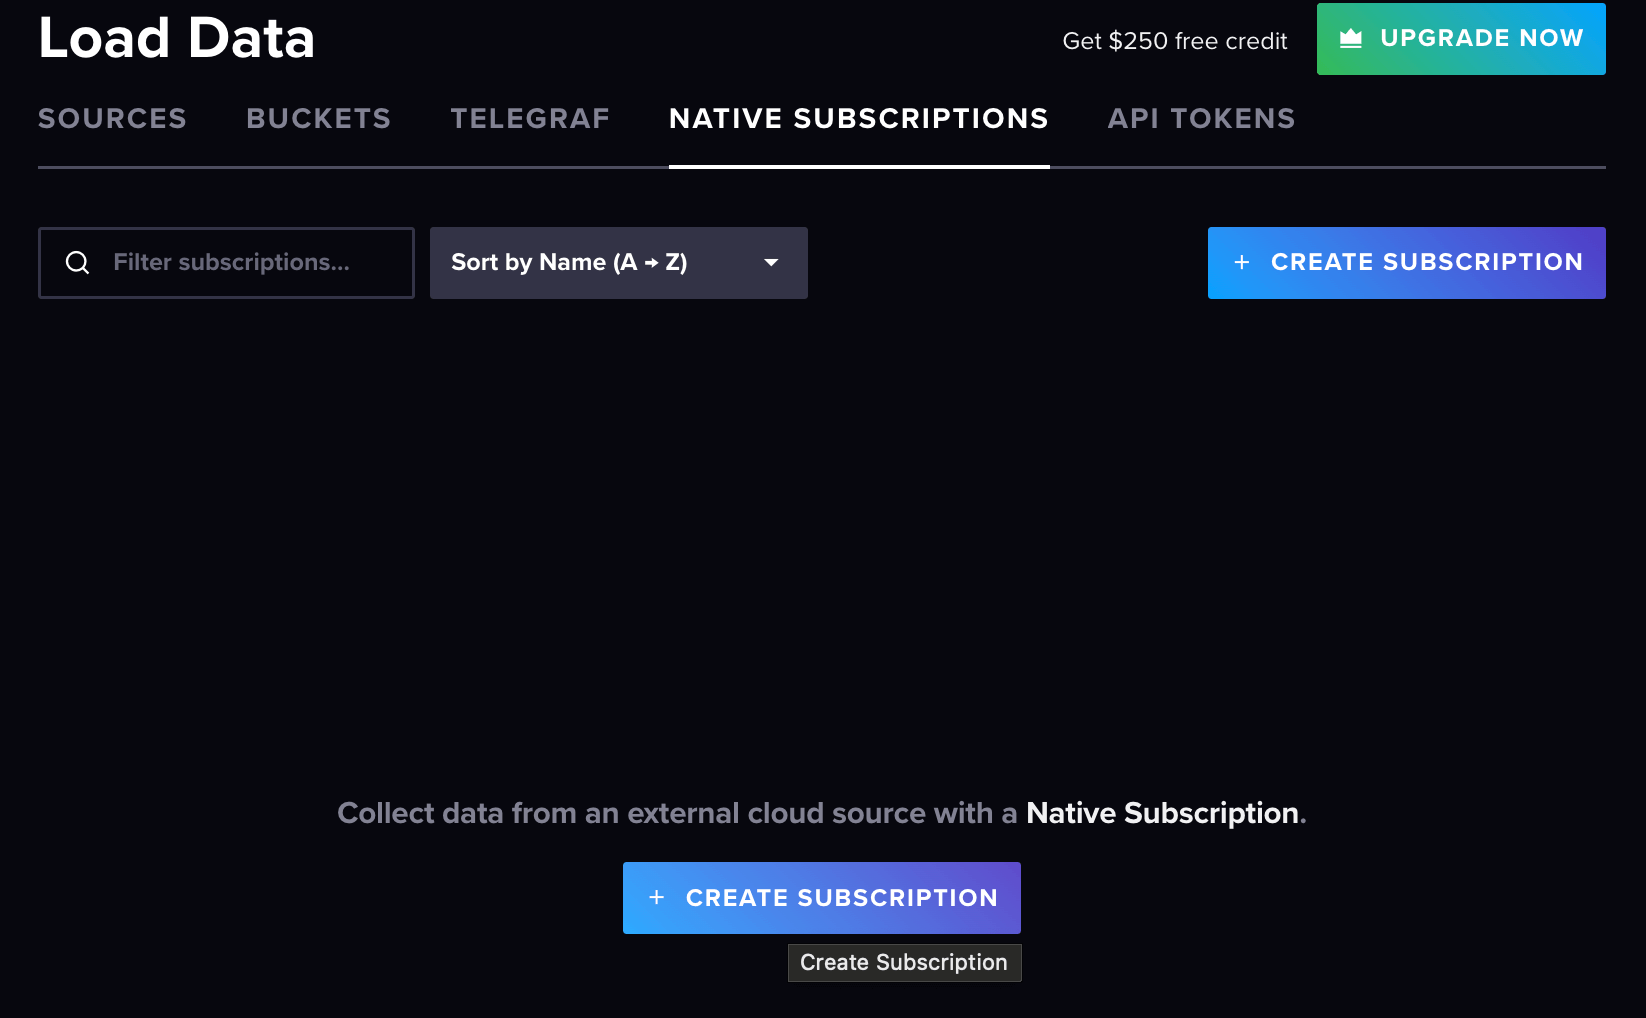 Select Native Subscriptions